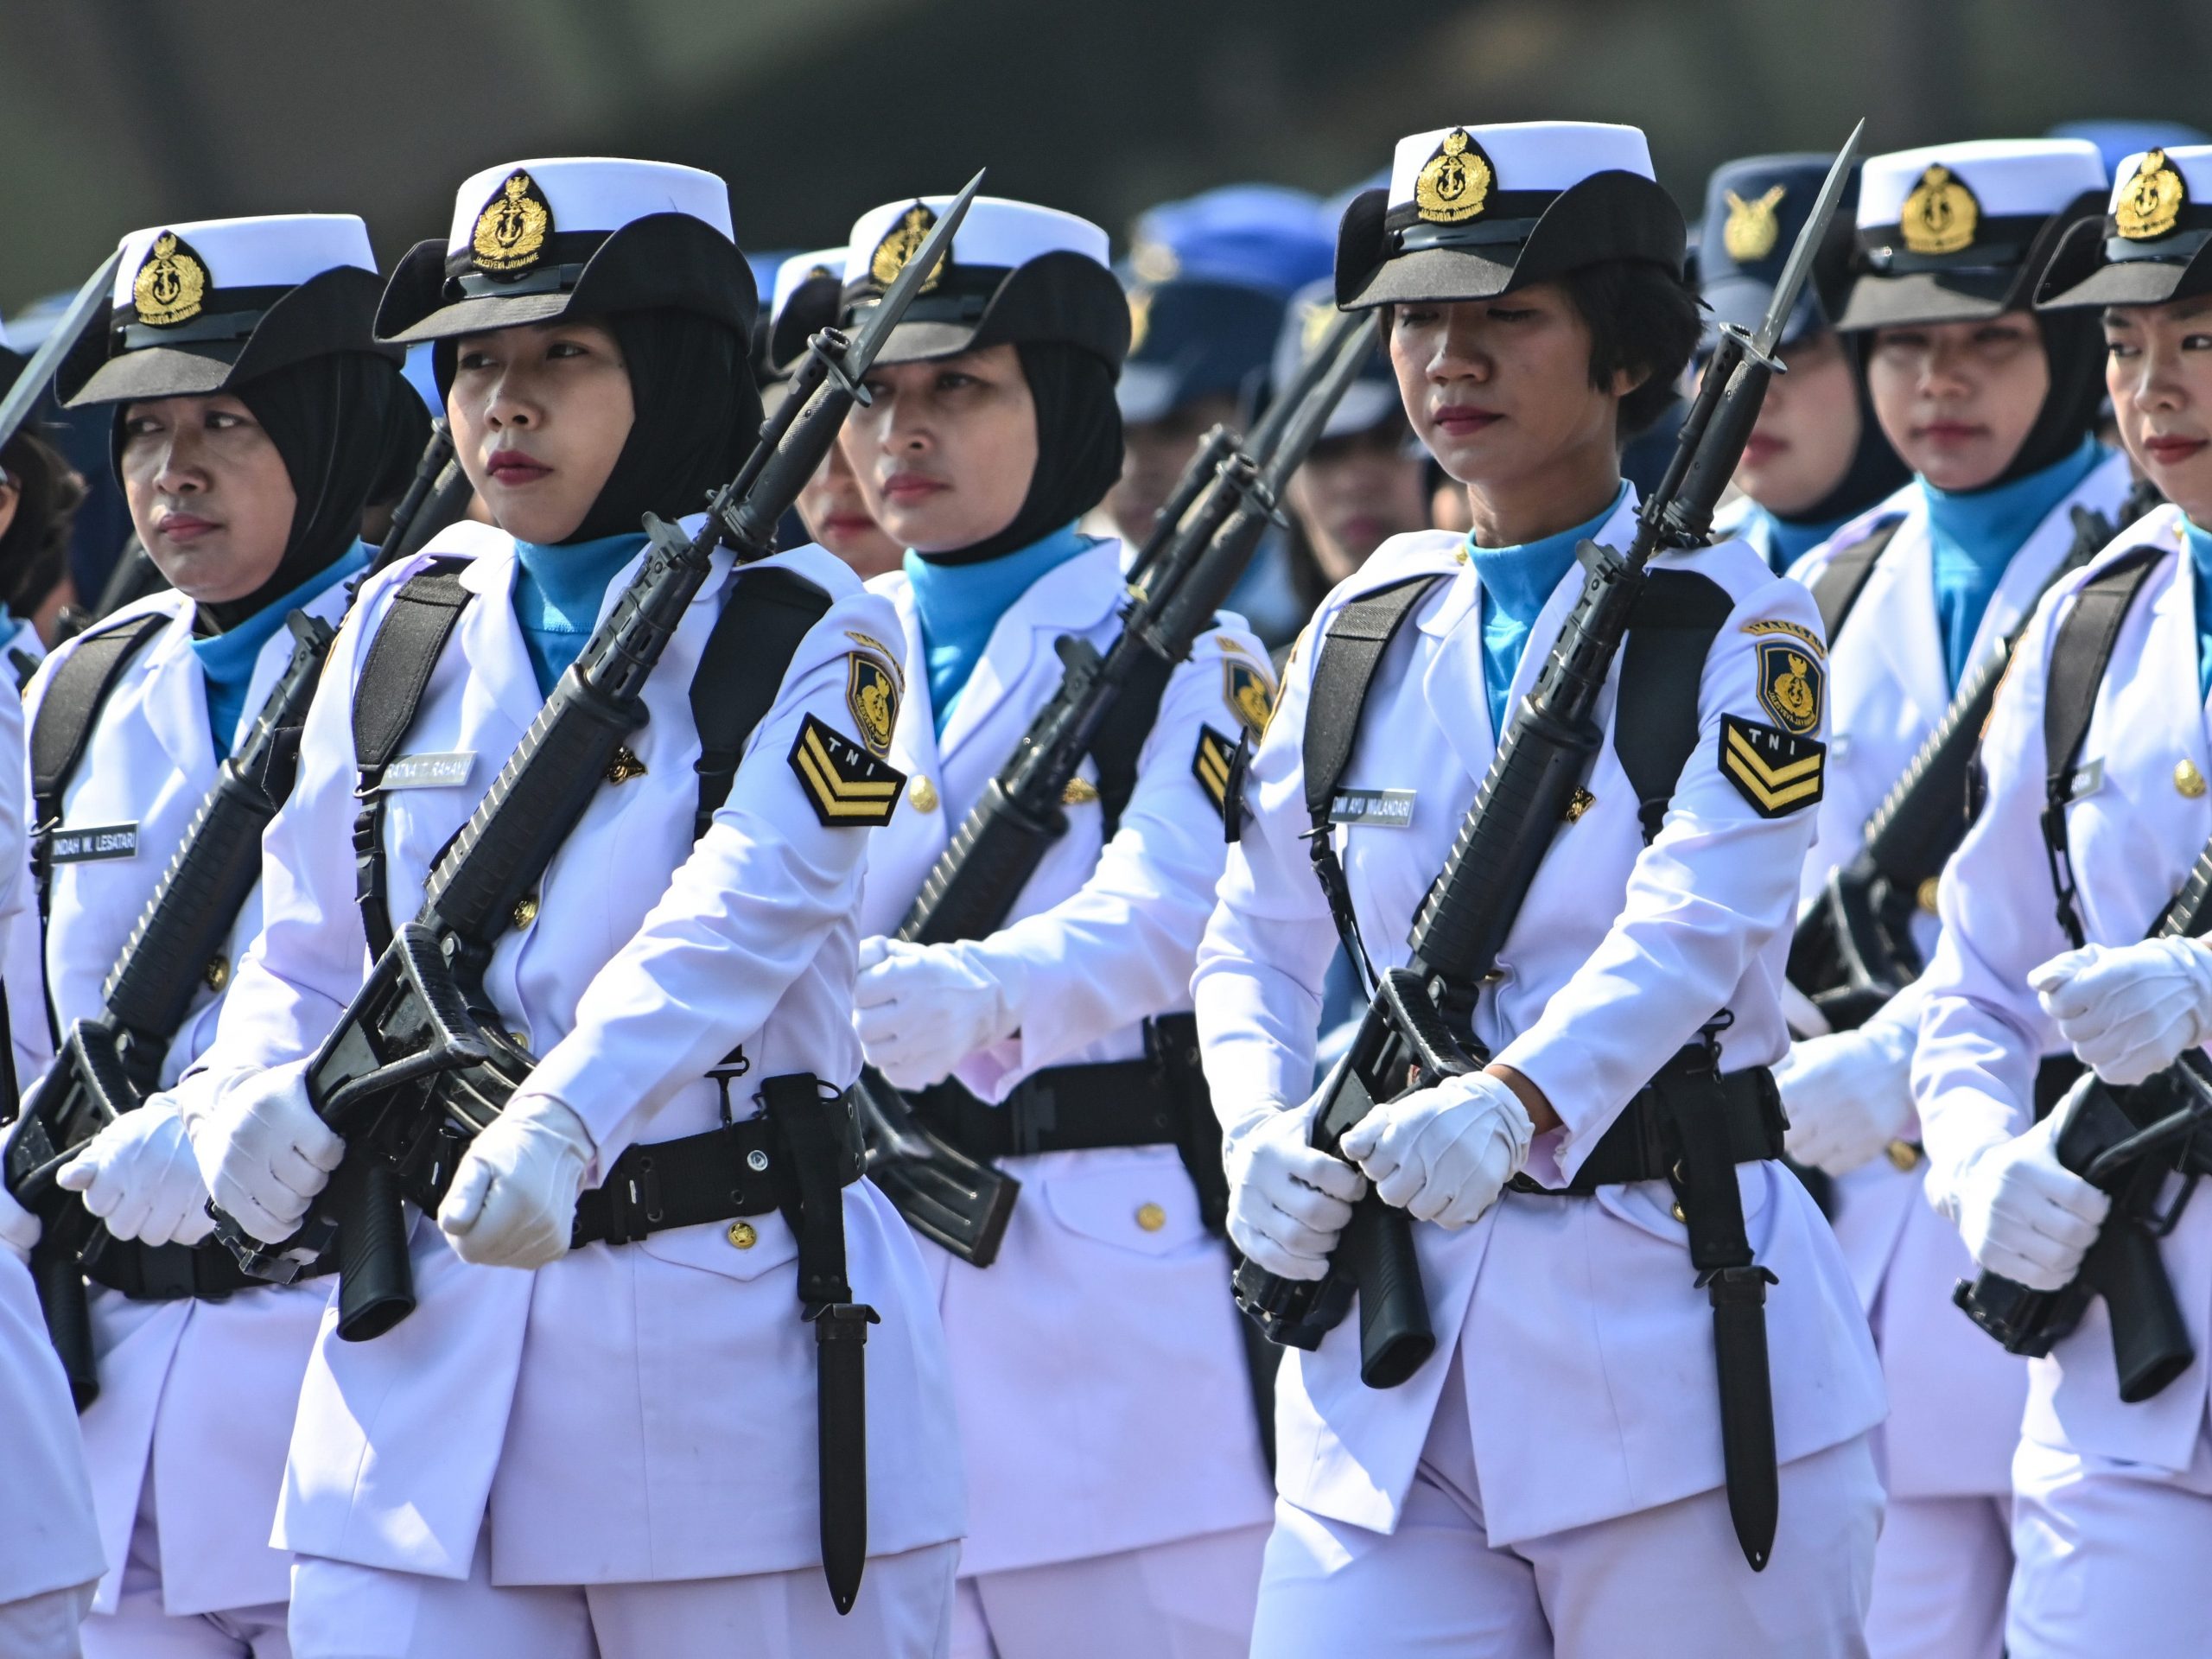 Female troops parade during a ceremony marking the 74th anniversary of the Indonesian military at Halim air force base in Jakarta on October 5, 2019.